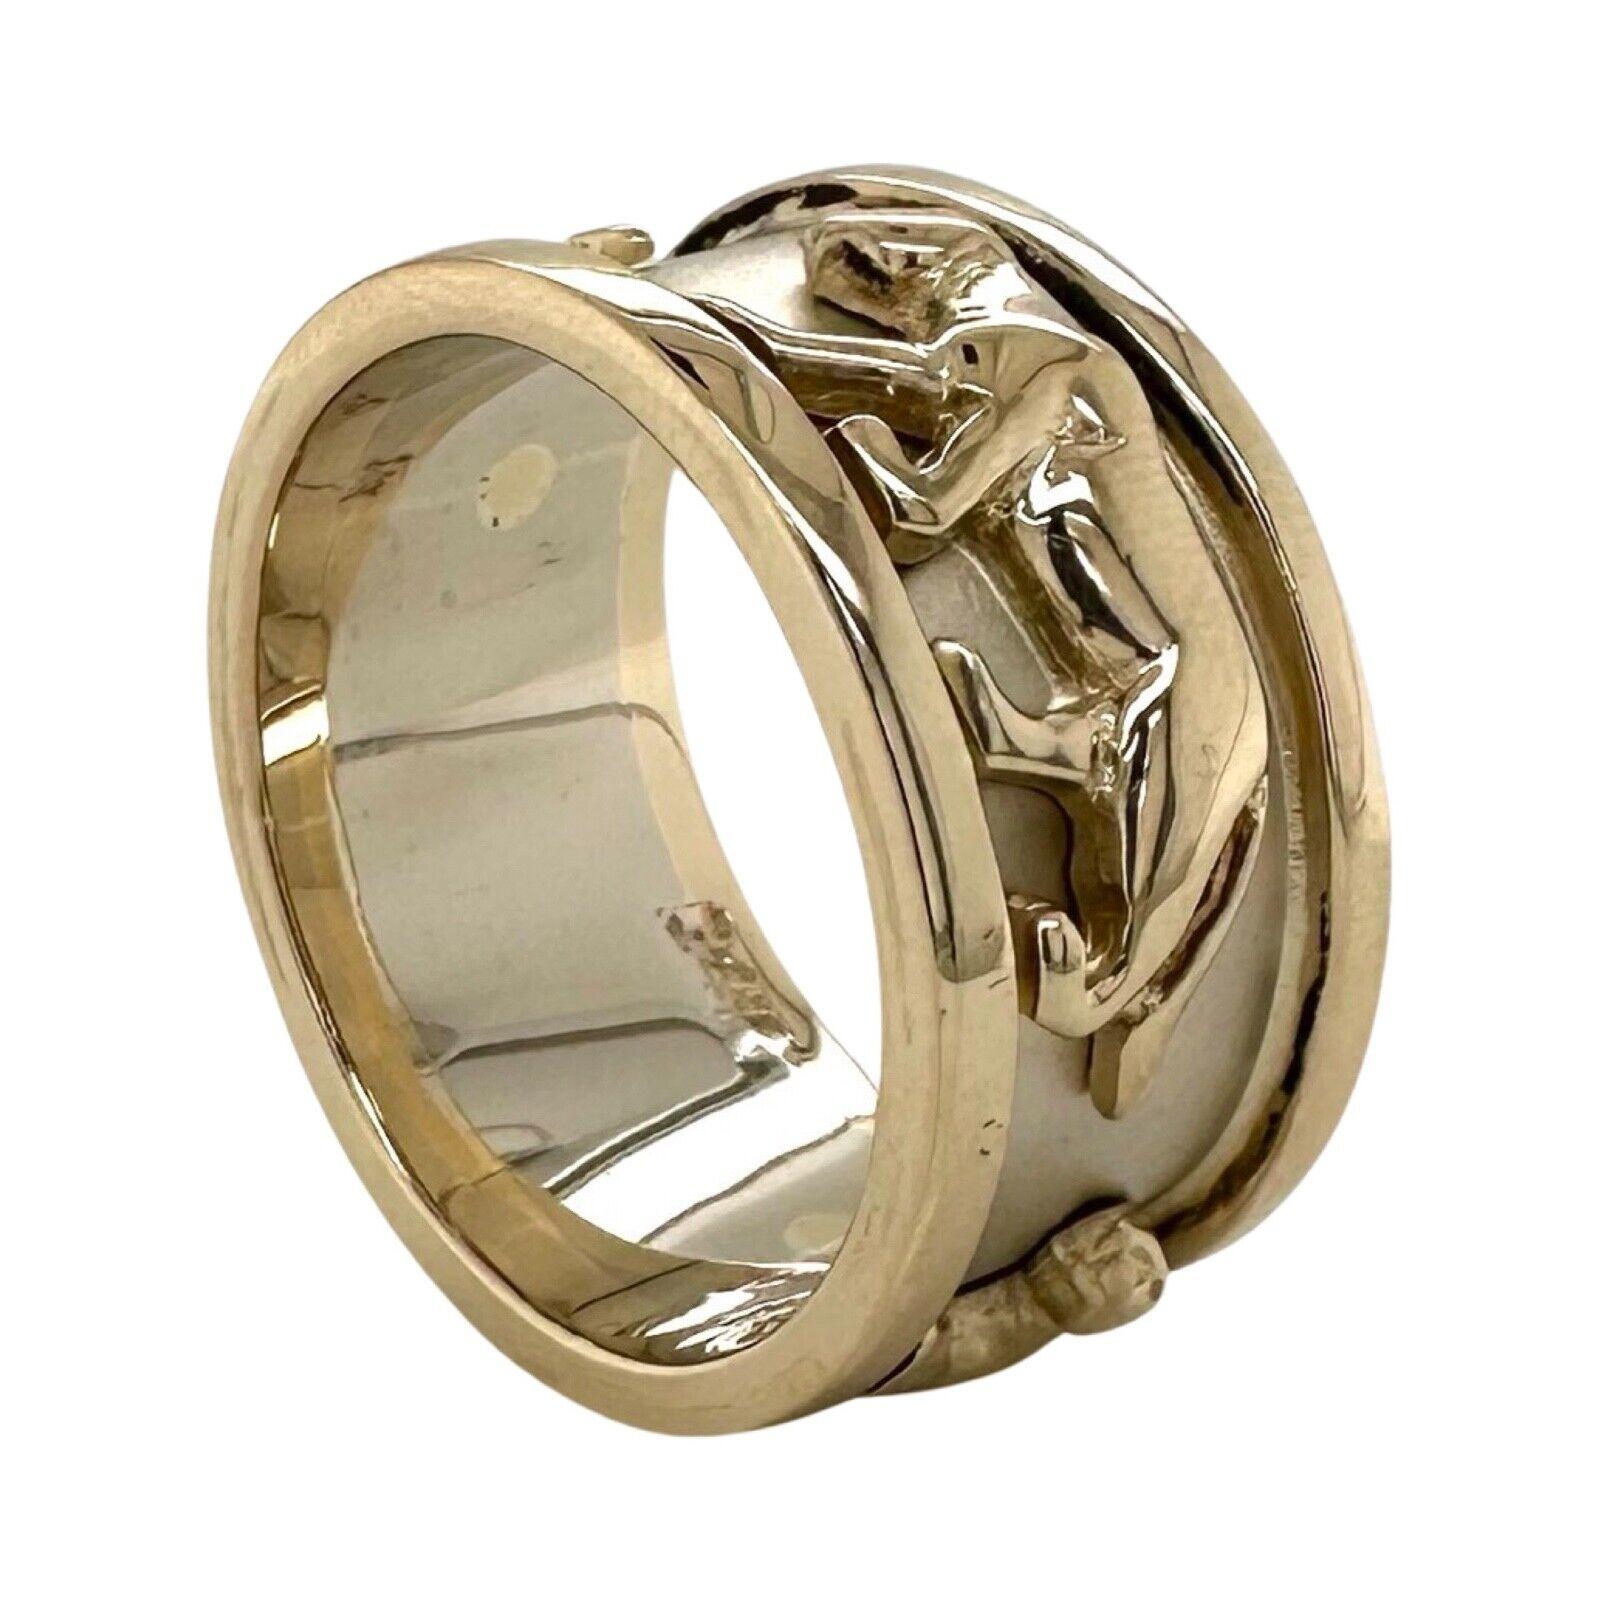 Designer : Unbranded

Style:  Walking Panther Band Ring

Metal: Yellow Gold

Metal Purity: 14k

Size: 11.25

Ring Length: approx. 1 inch

Band With: approx. 0.5 inches

Total Item Weight(grams): 15.3 grams

Hallmarks:​​​​​​​ 14k

Includes: 24 Month